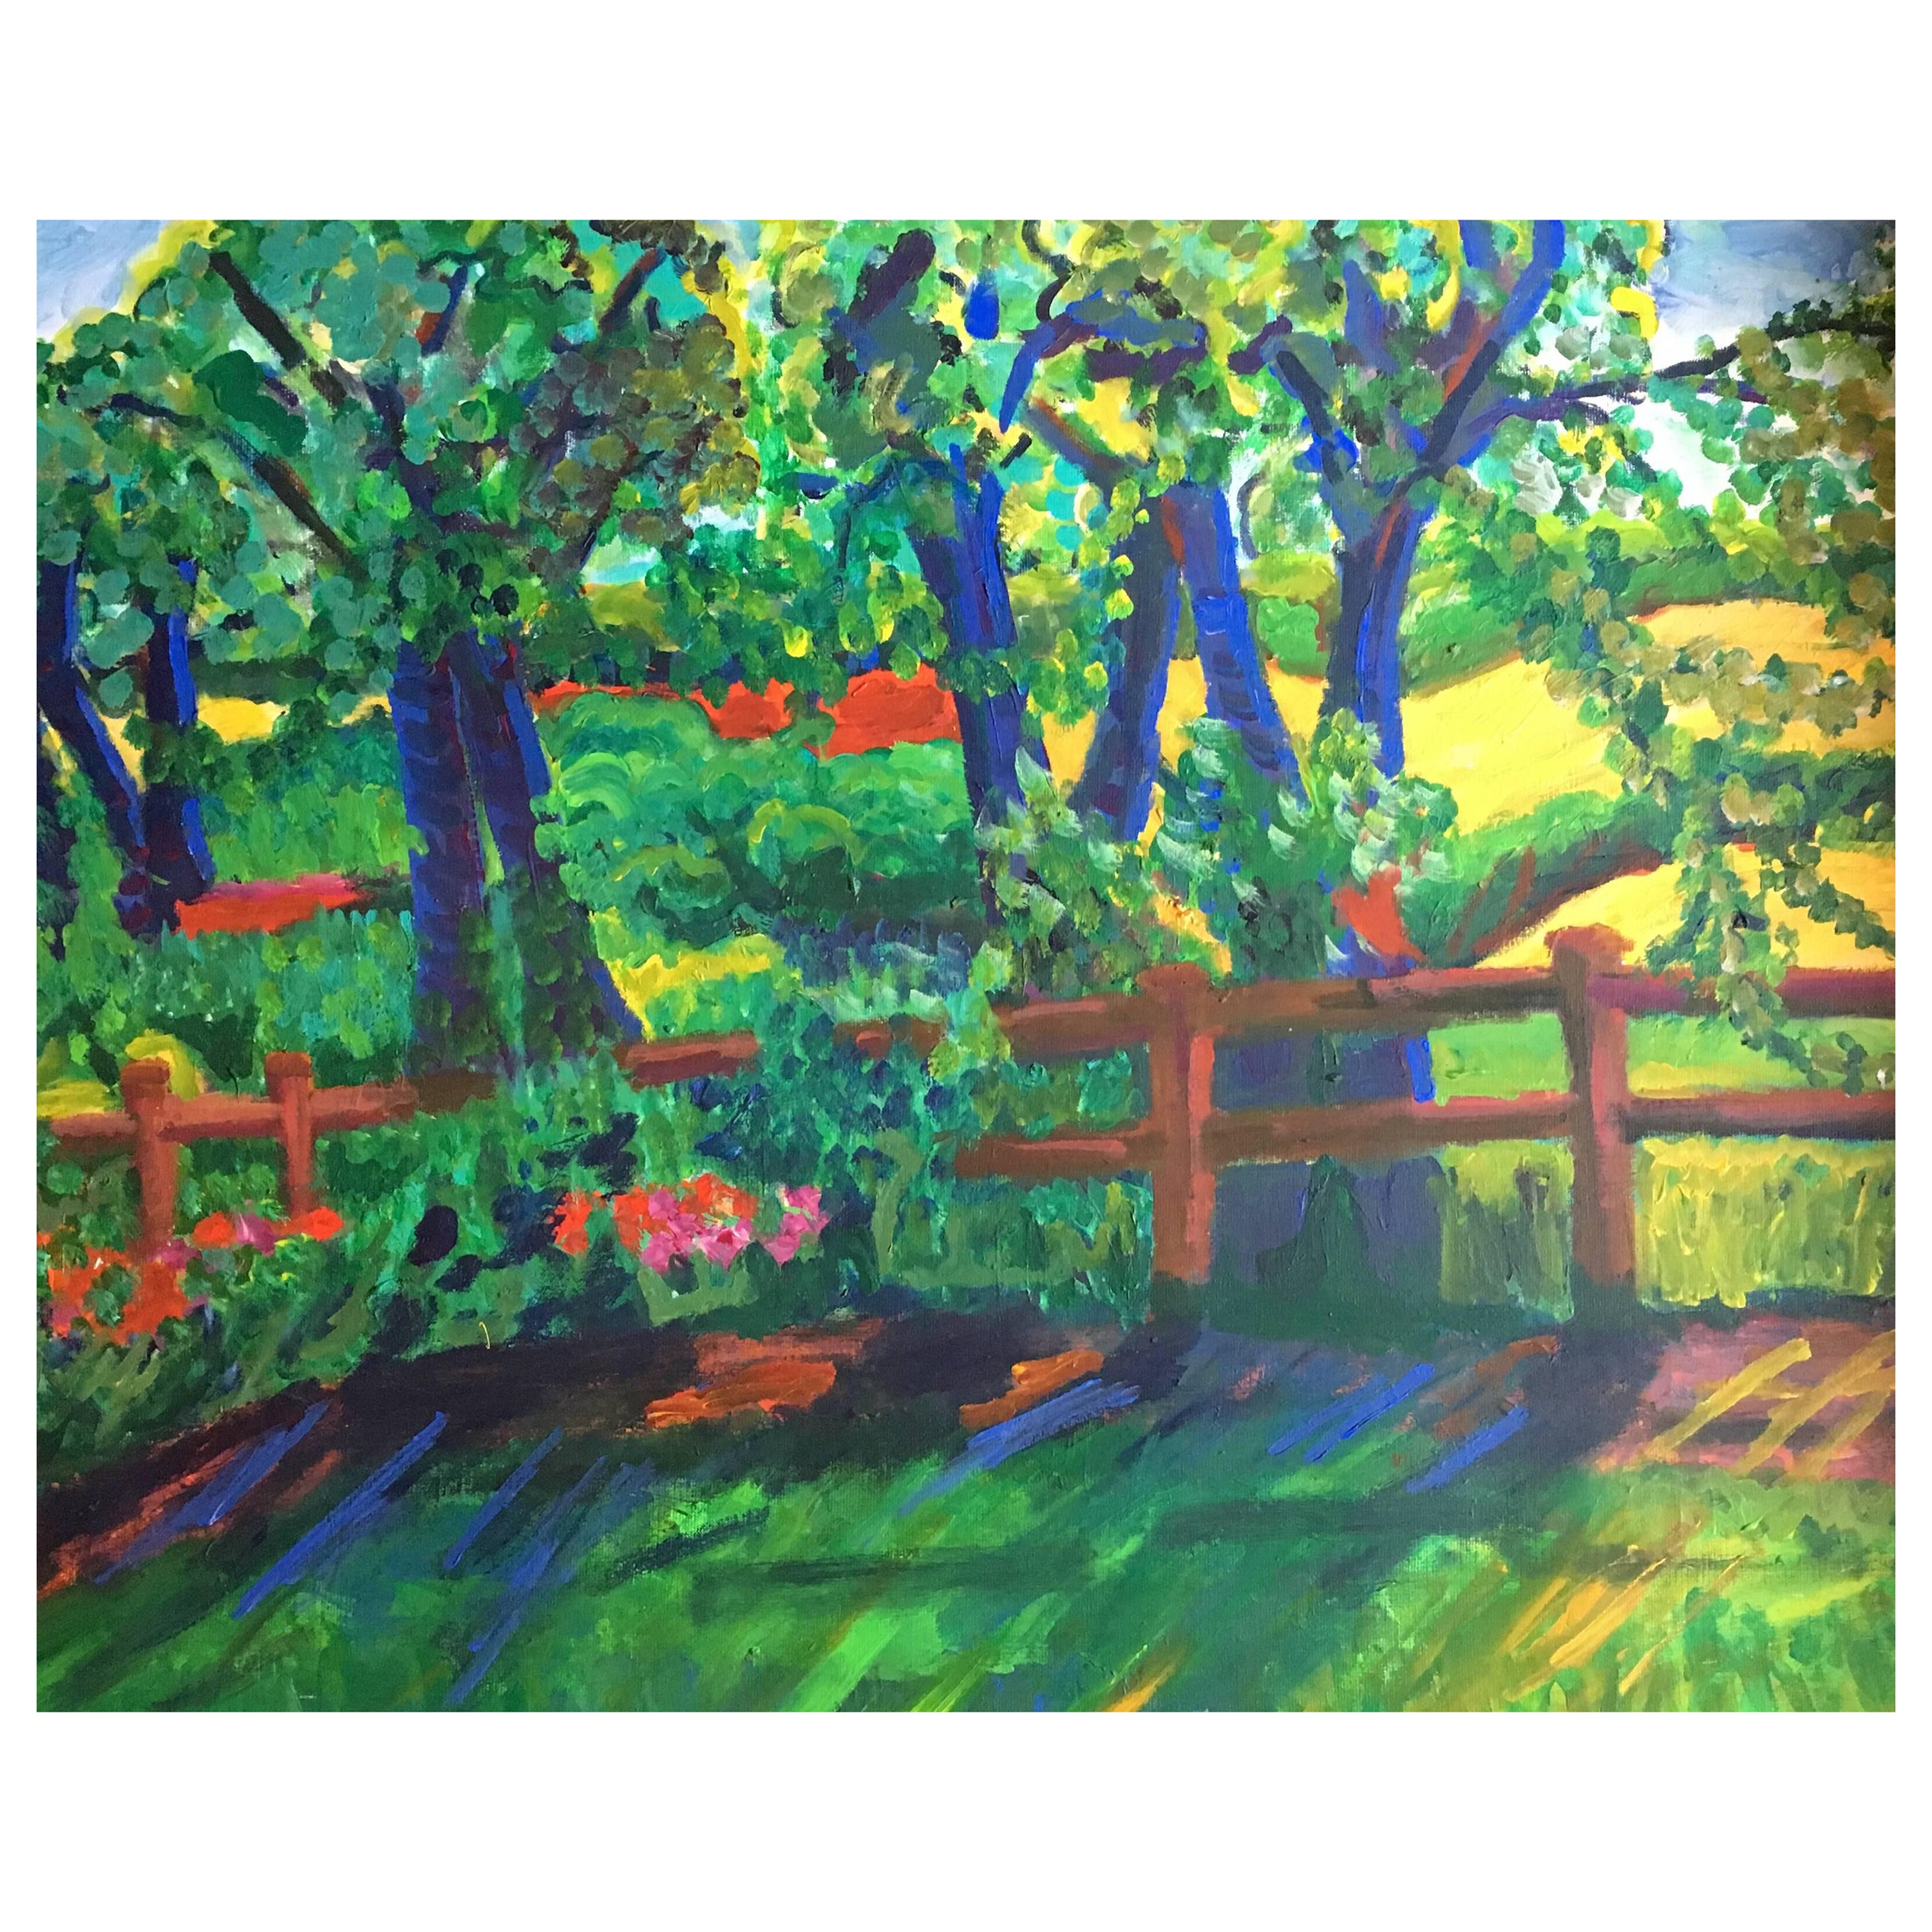 Pamela Cawley Landscape Painting - Huge British Oil Painting Impressionist Sunlit Country Lane Green & Gold Colors